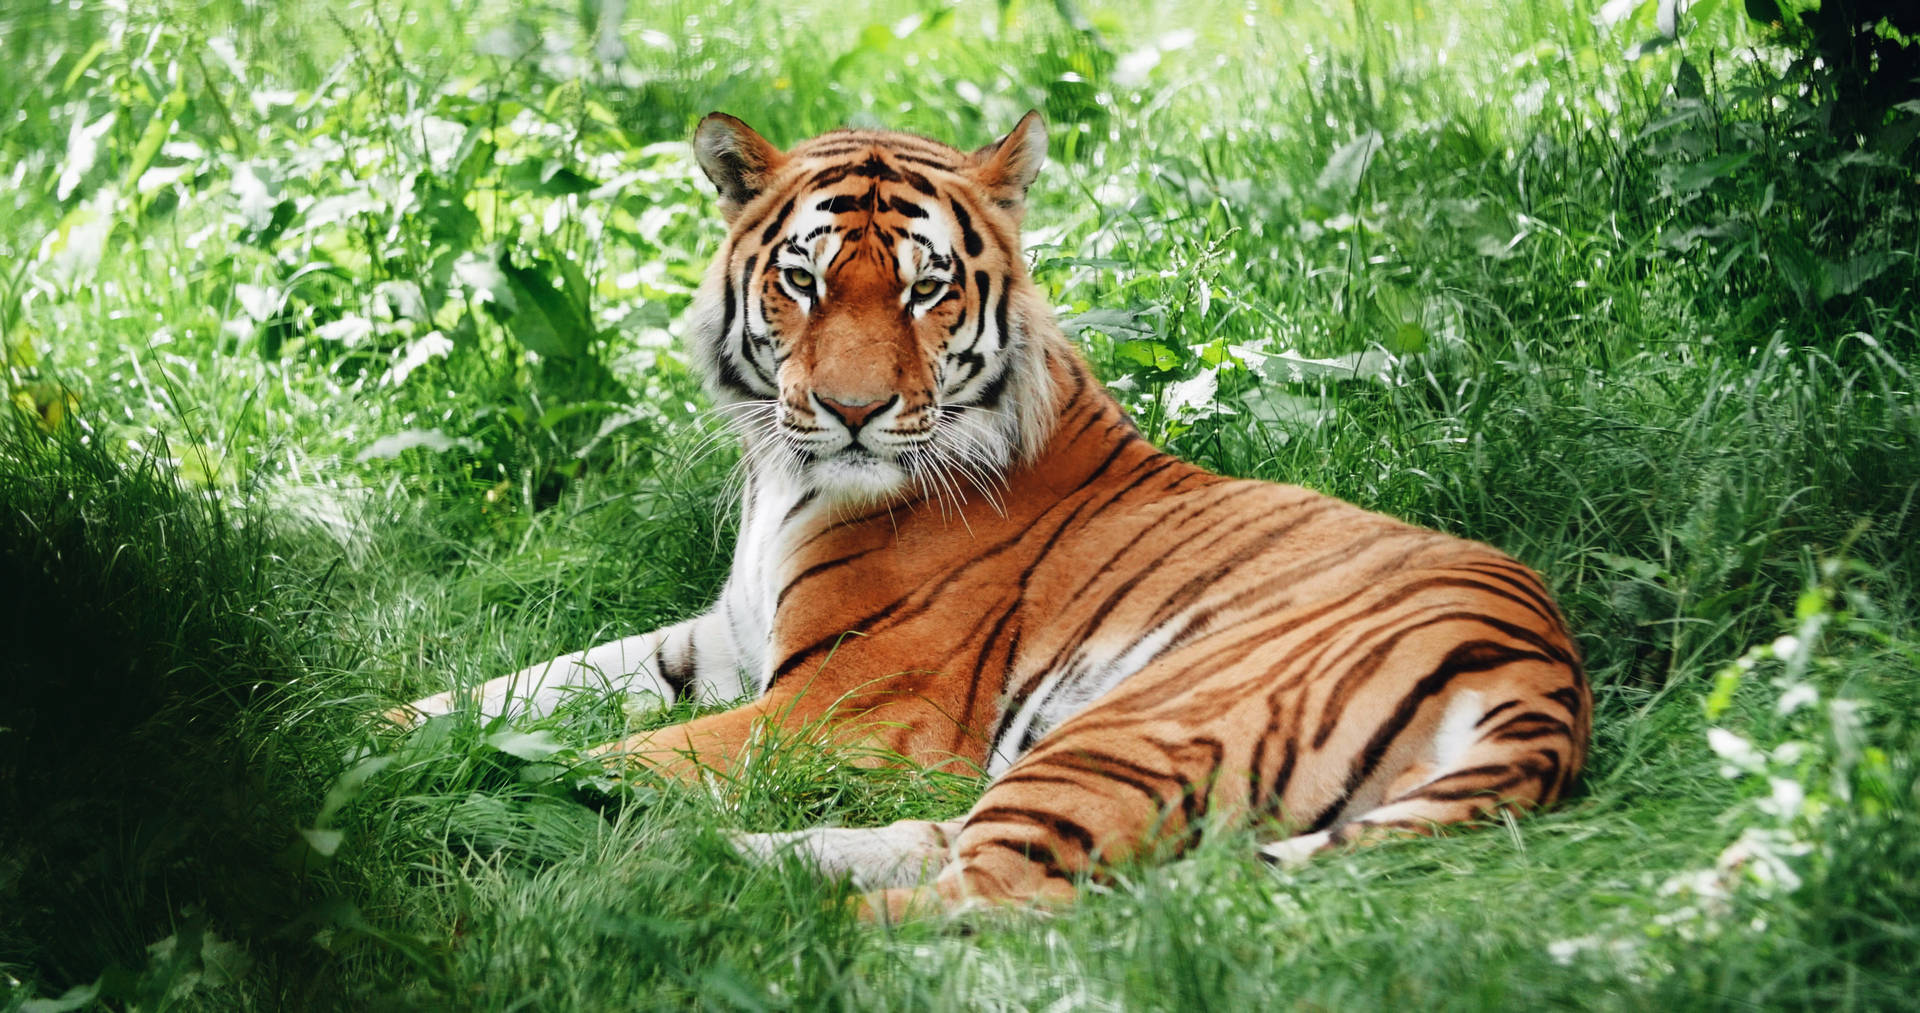 4096X2160 Tiger Wallpaper and Background